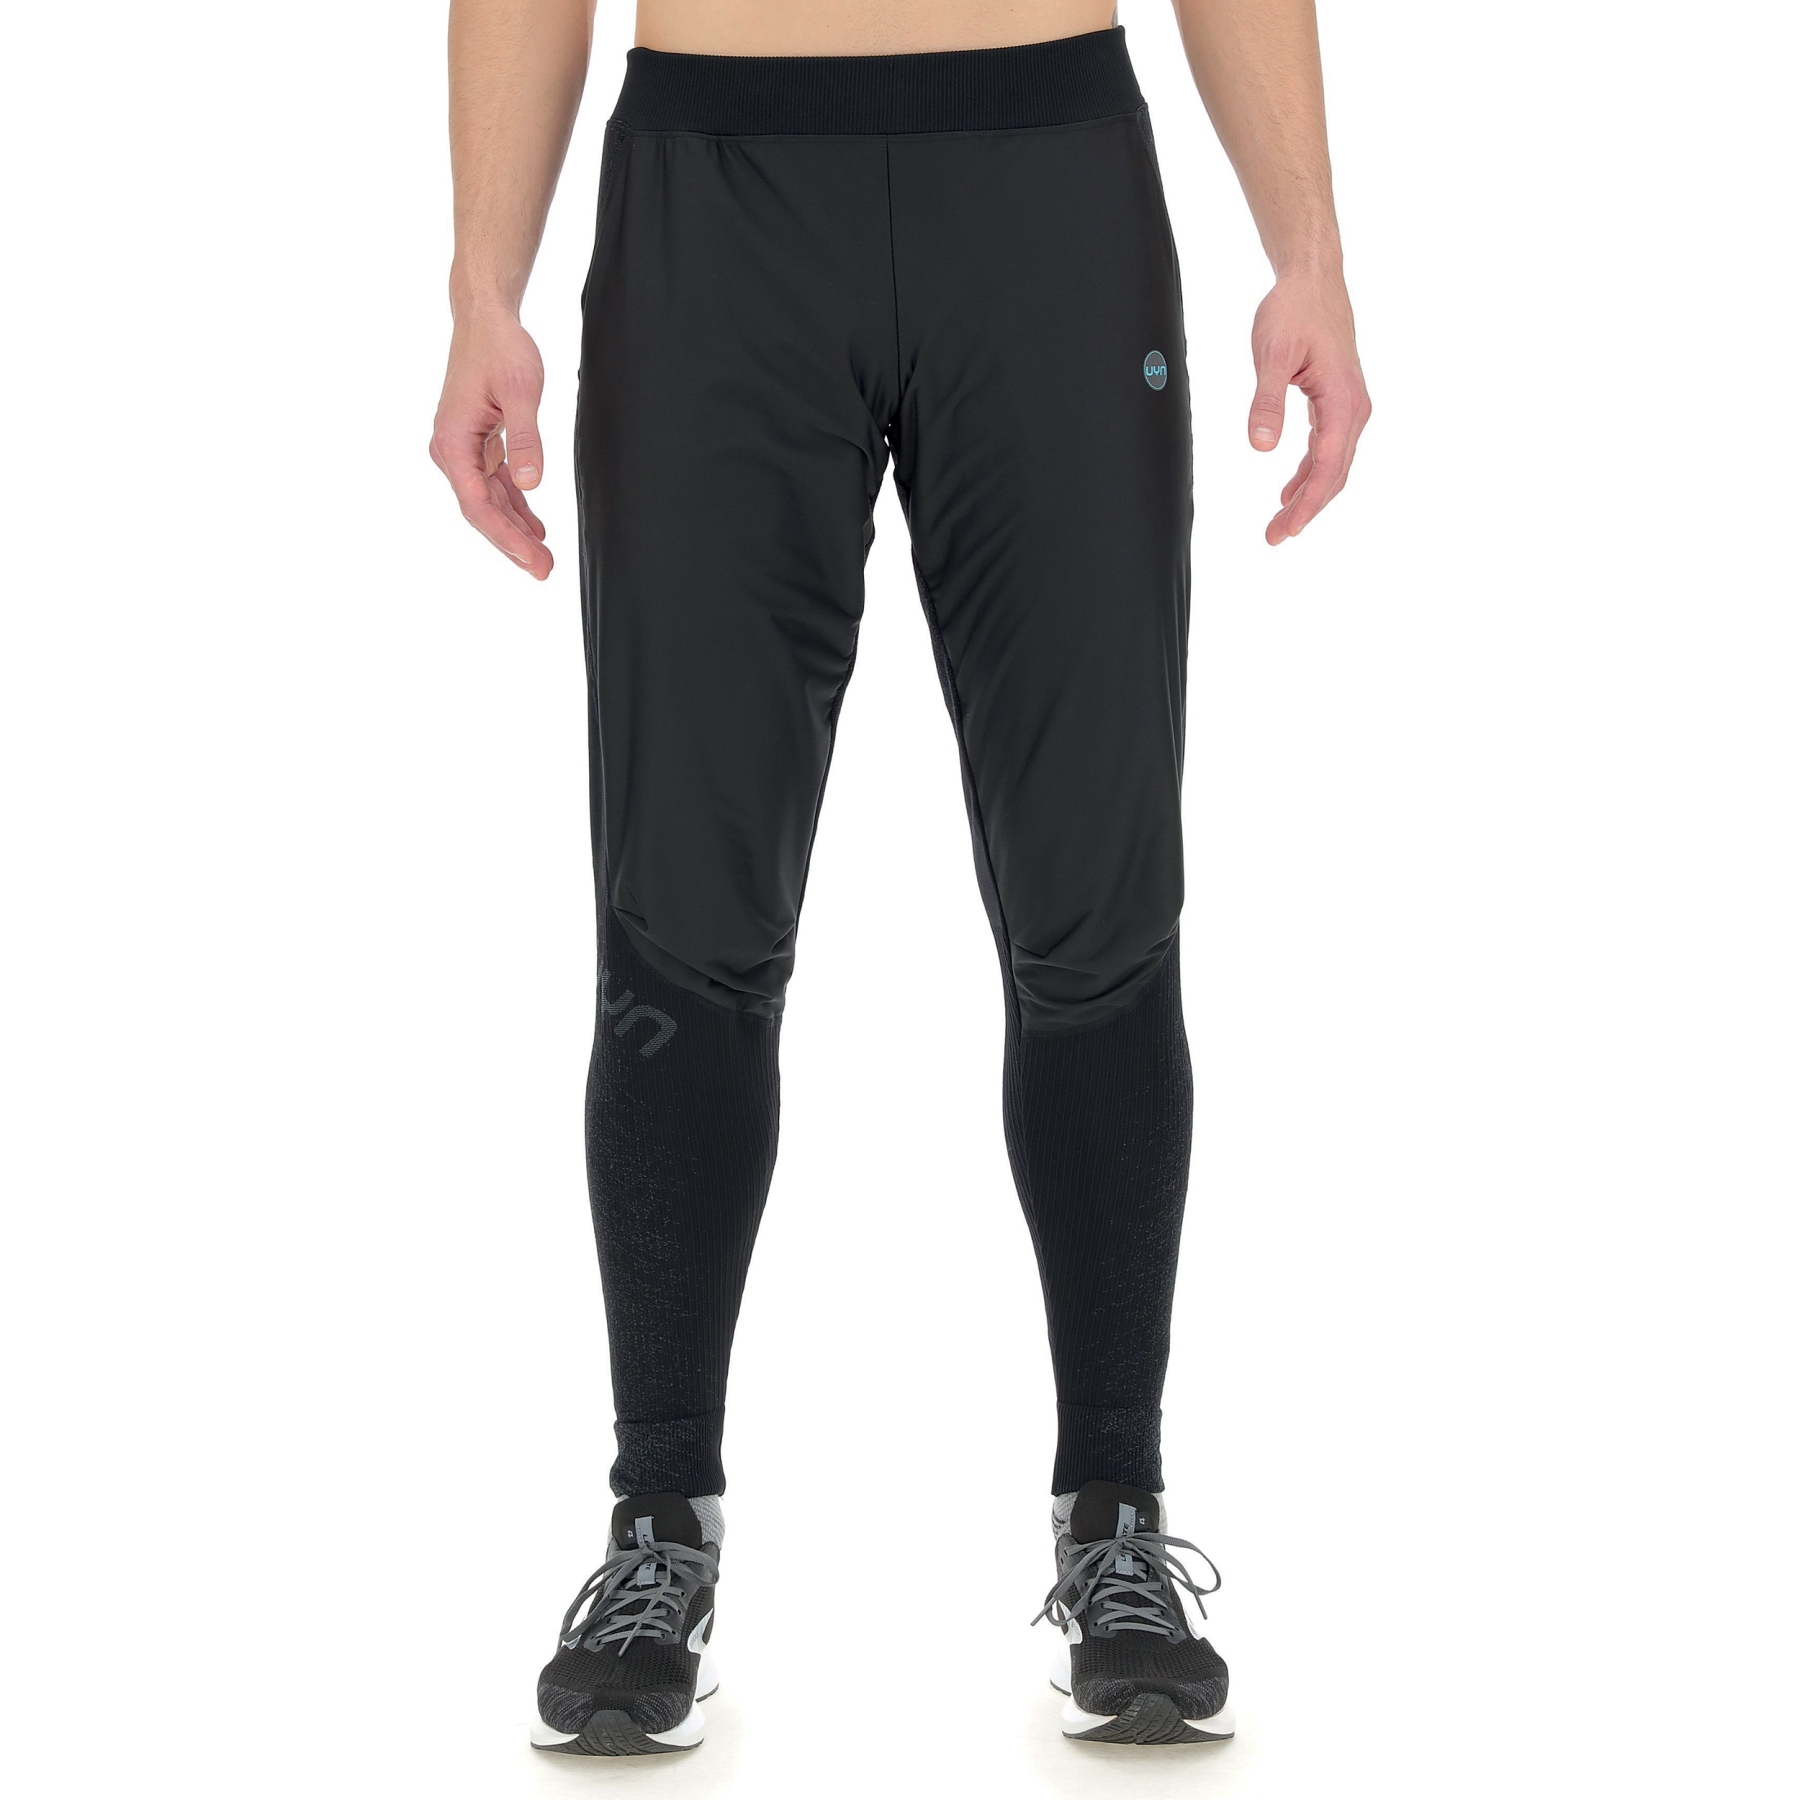 Picture of UYN Running Exceleration Wind Pants - Black/Cloud